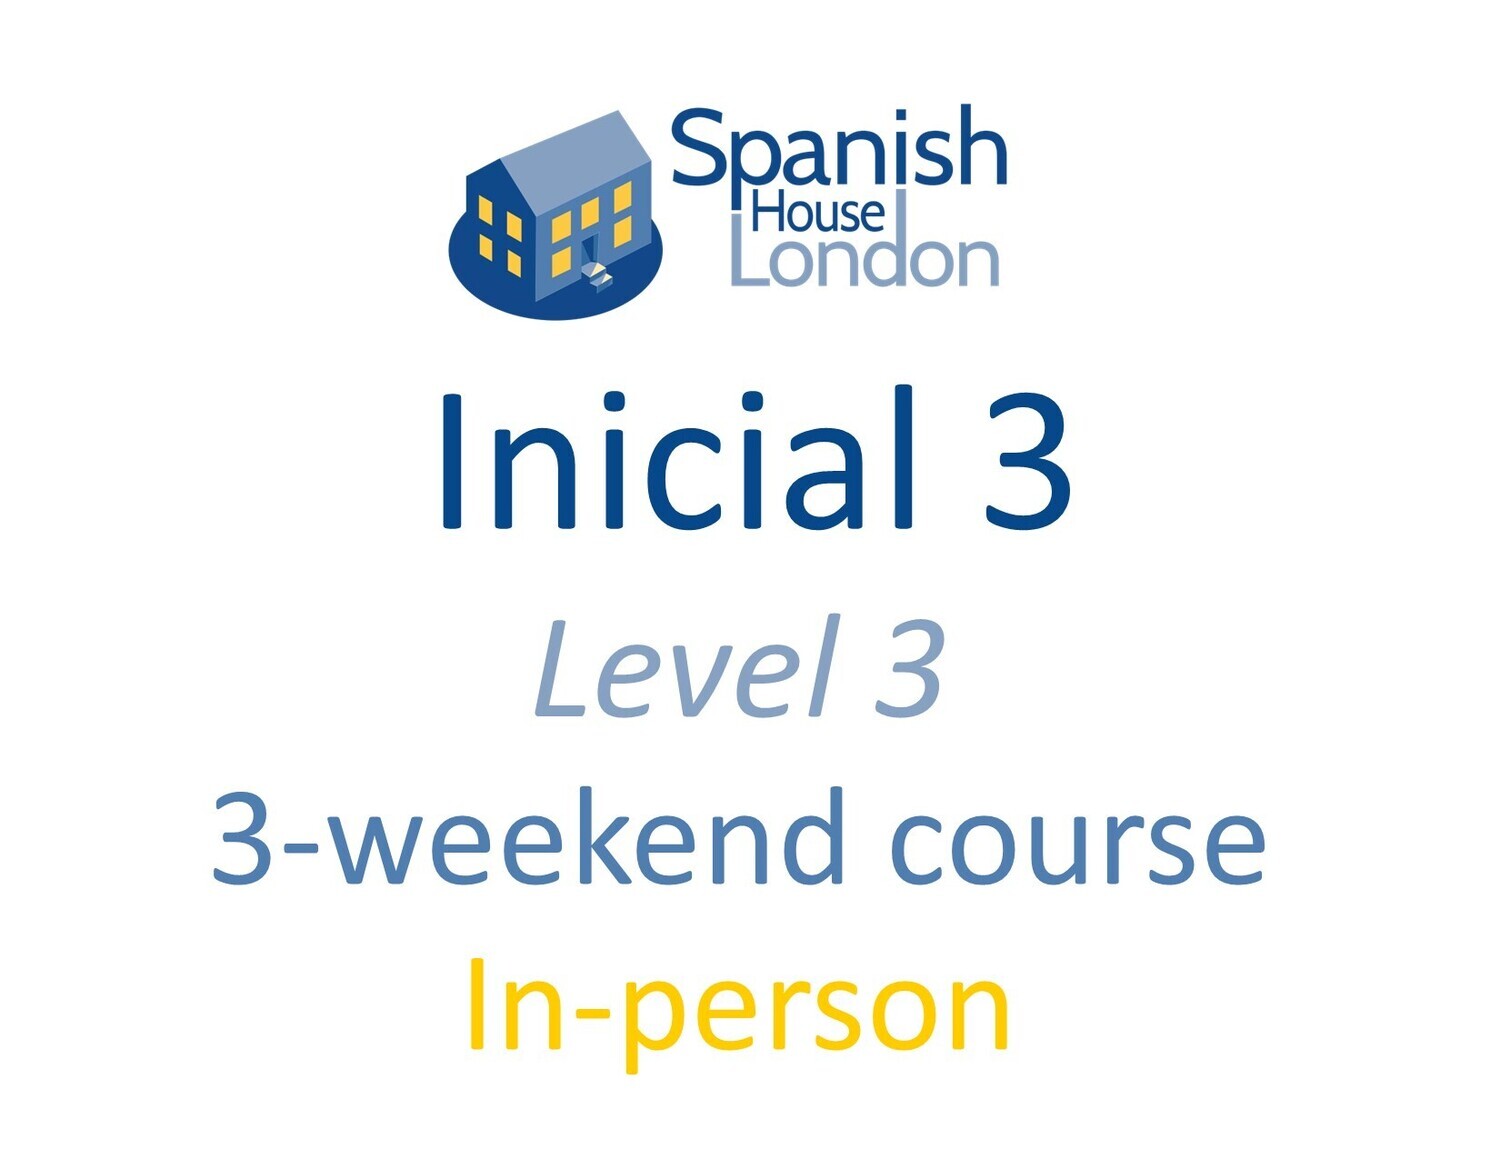 Weekend-Intensive Inicial 3 Course starting on 27th October at 7pm in Clapham North